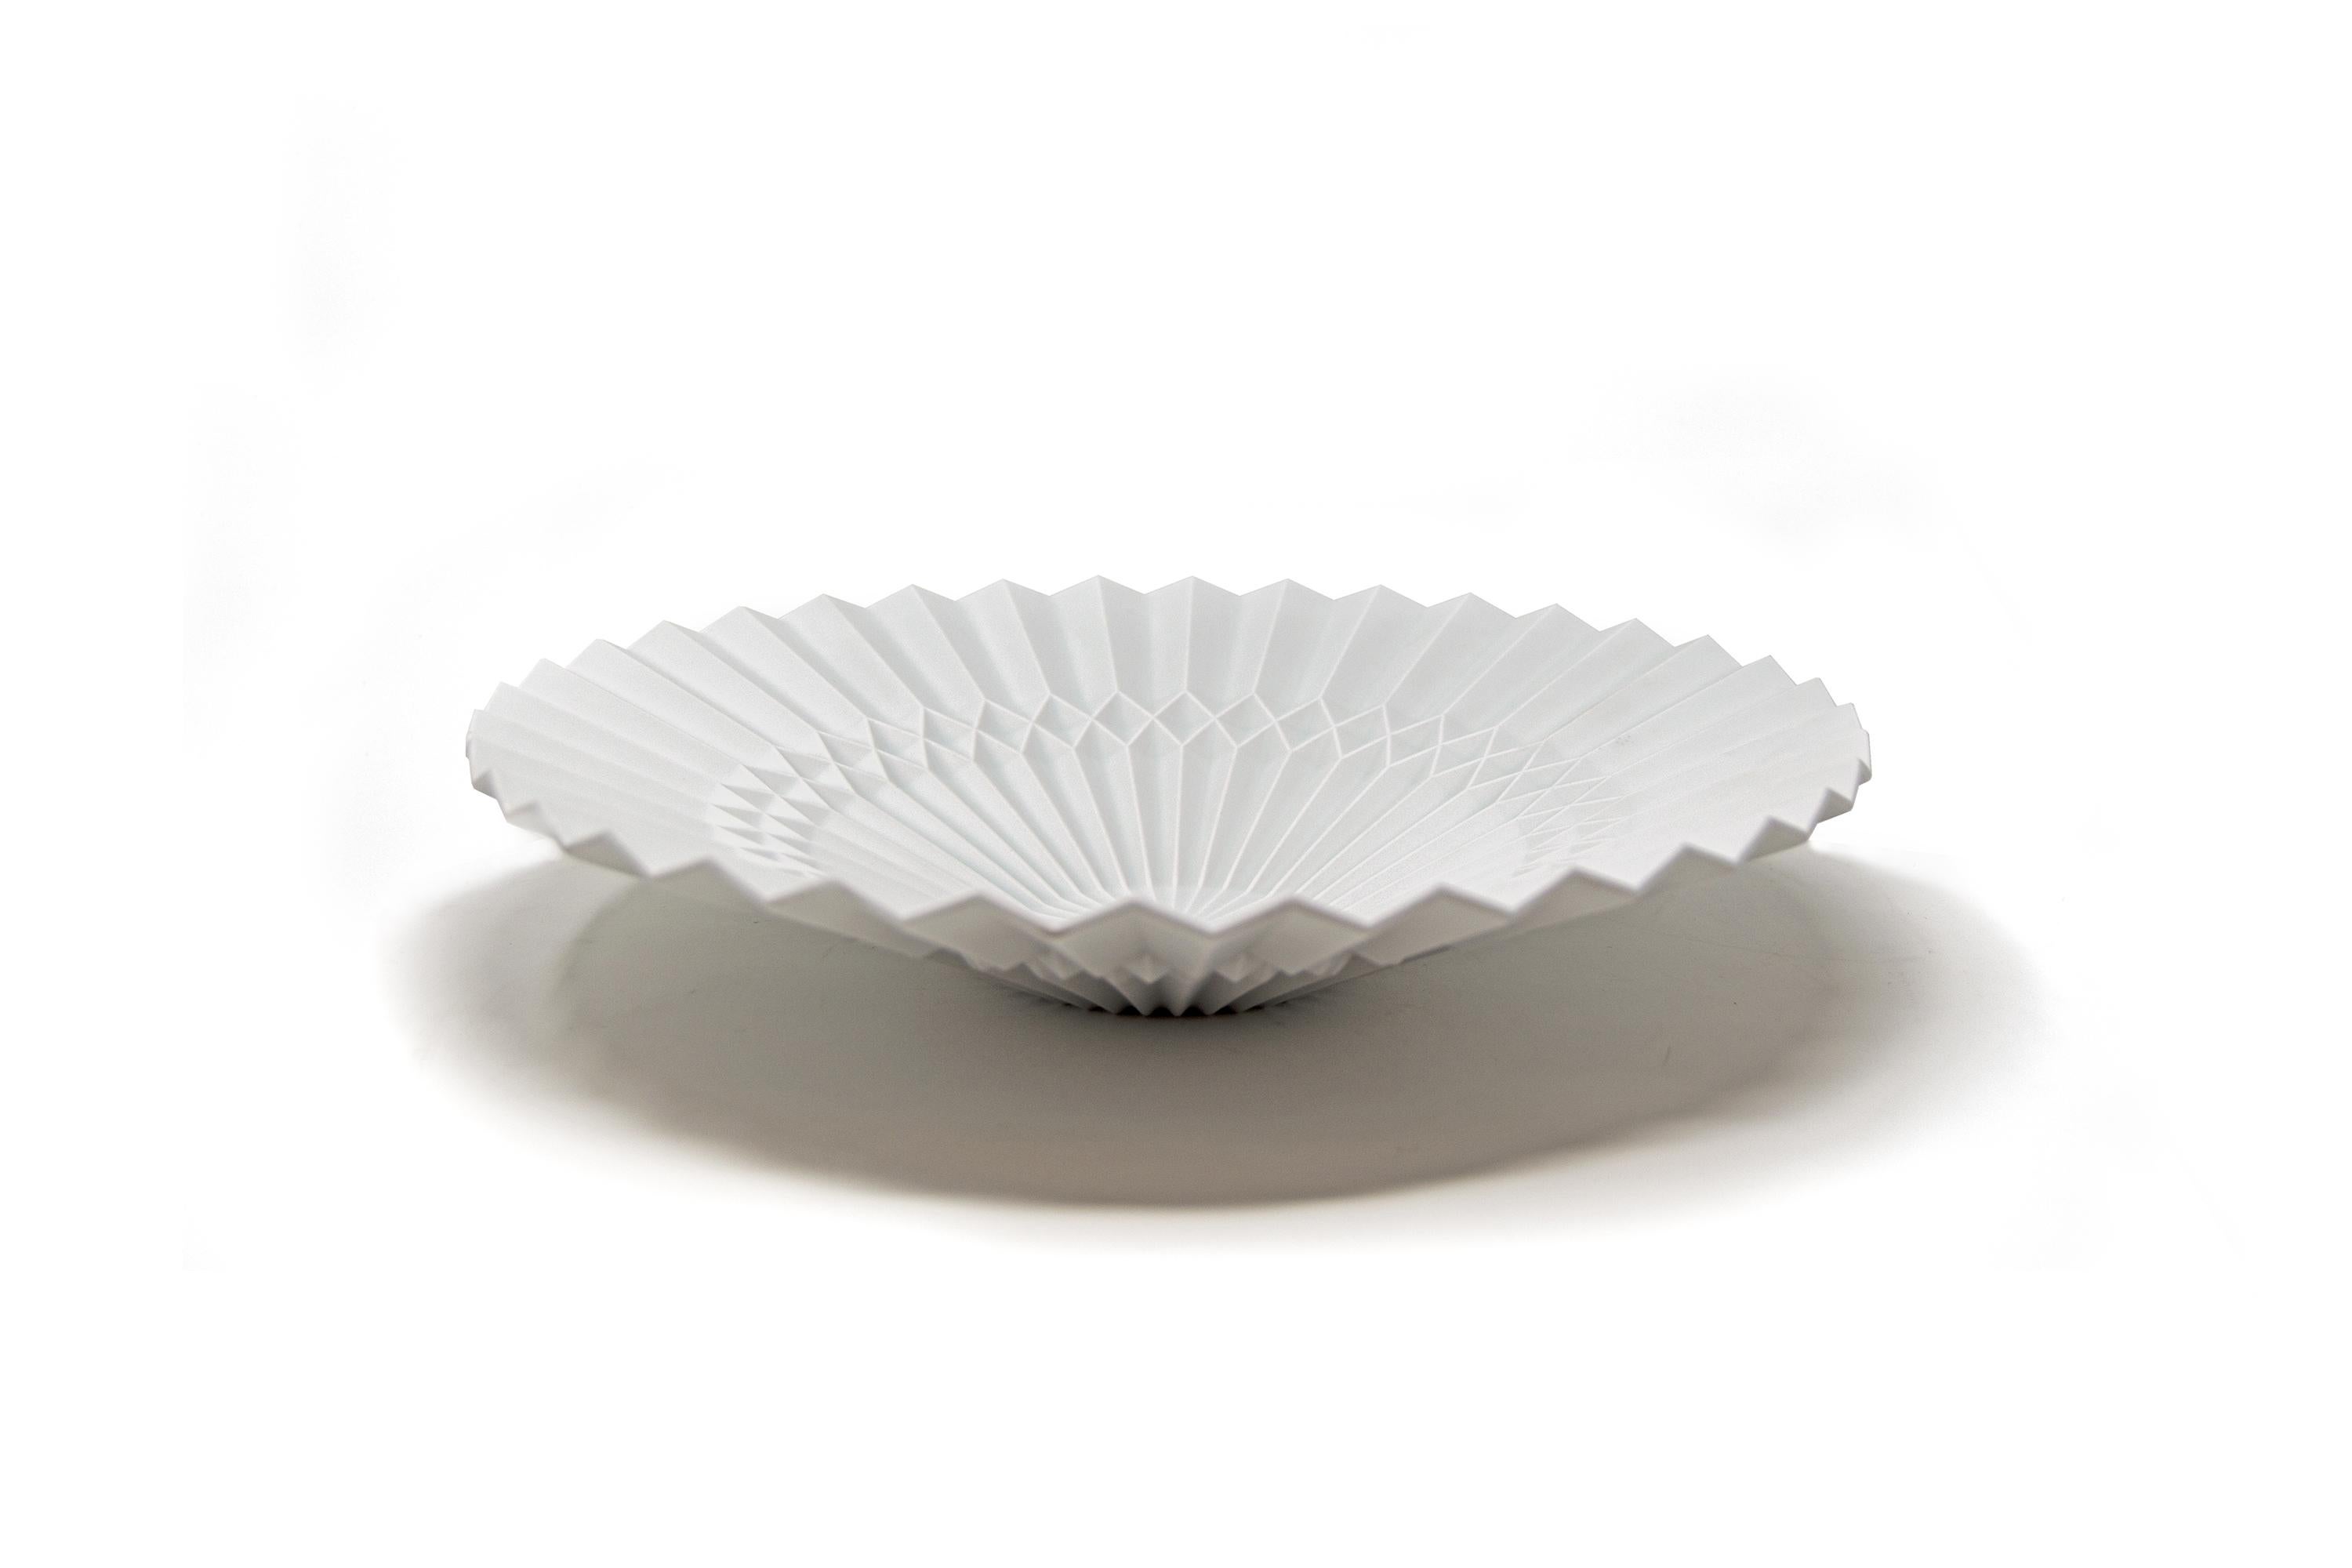 Contemporary Japanese Arita Porcelain Tray 'Pliage' For Sale